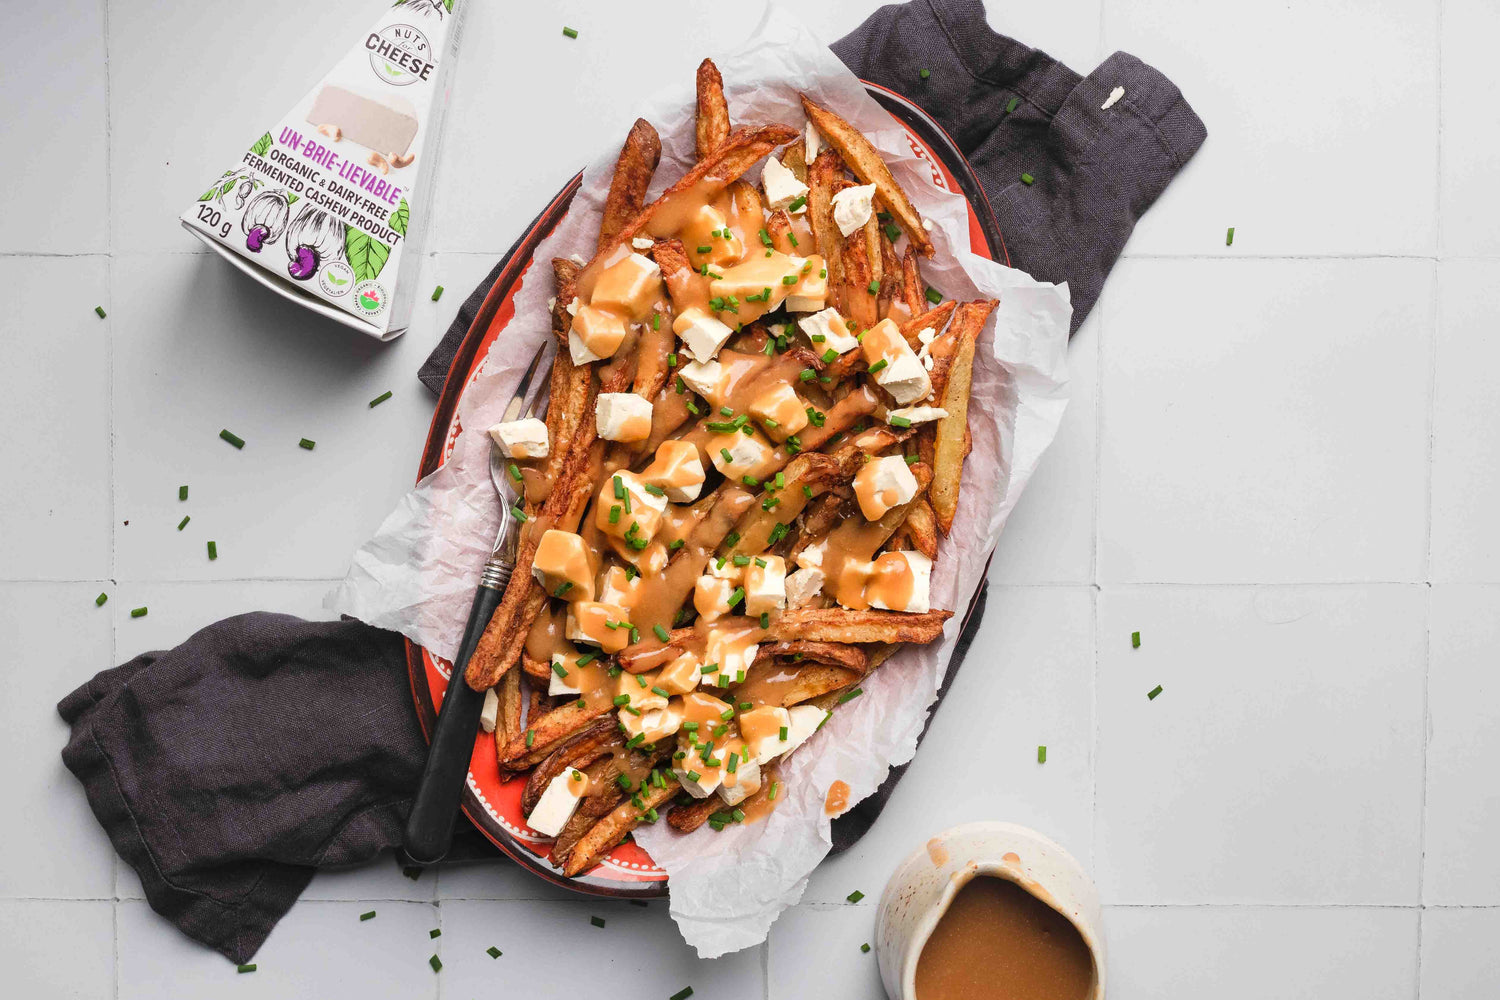 Prepared dish of vegan classic poutine using dairy free brie, set on a napkin with a side of plant based gravy.